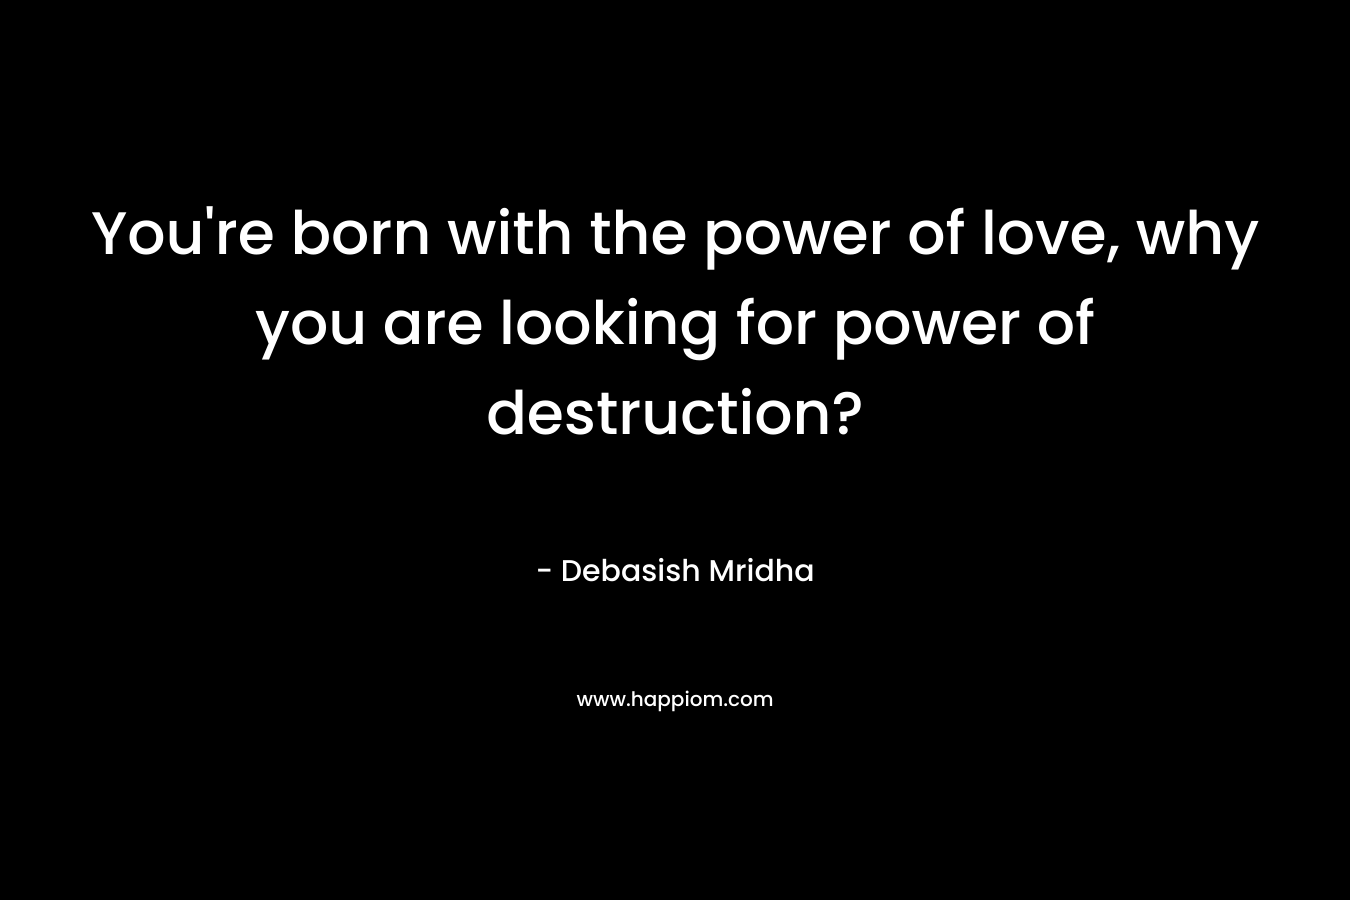 You're born with the power of love, why you are looking for power of destruction?